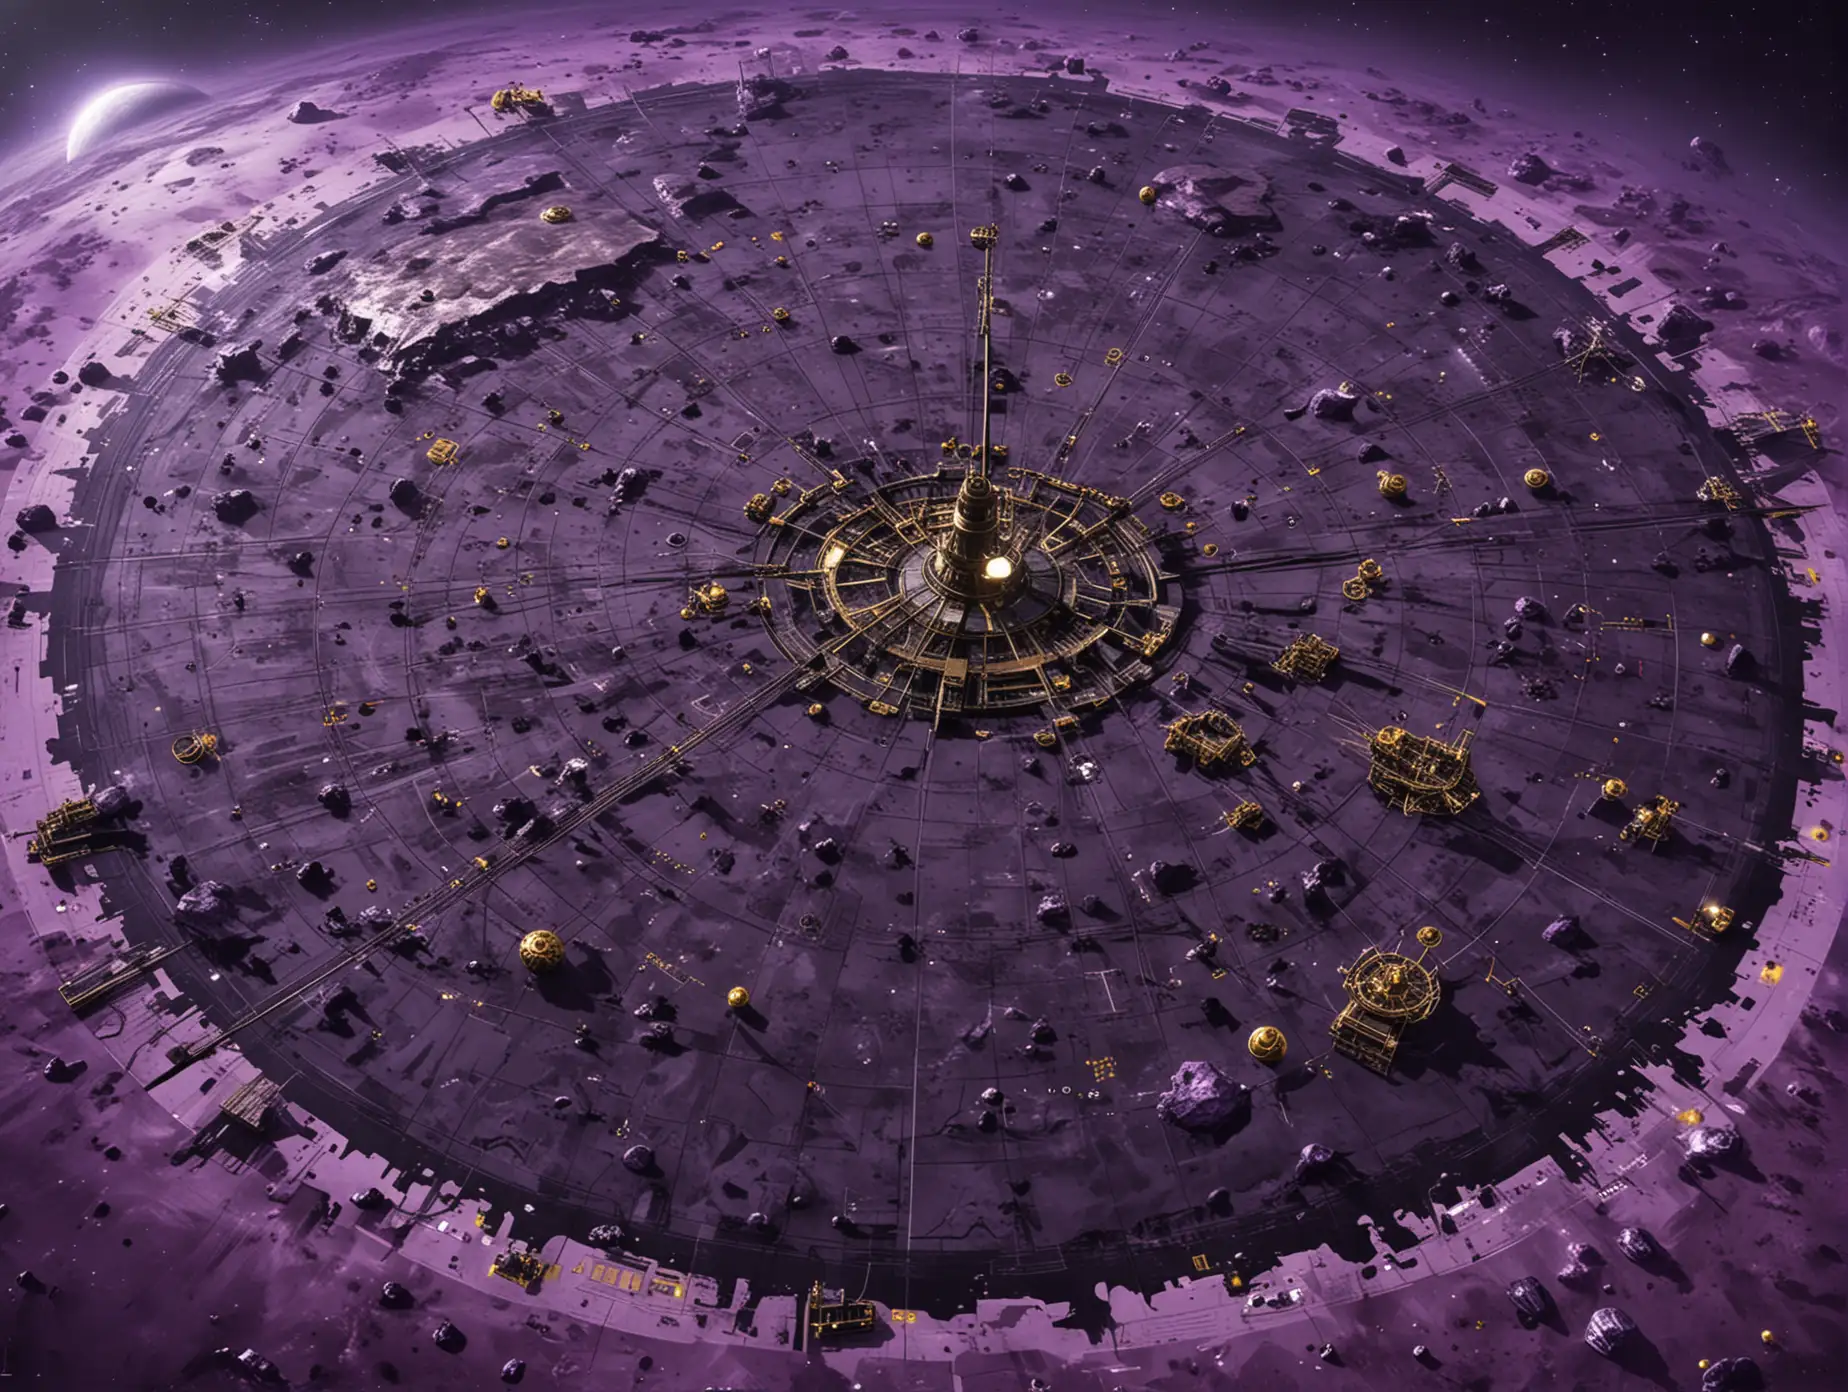 A Very huge unexplored abadoned Black-purple Planet's huge map. The map's from the top.
The map is abadoned and extinct, The map's majority is PLAIN but some metal and gold sites can be found on the map and one little tech base on the middle of the map sorrounded by four tiny oil rigs